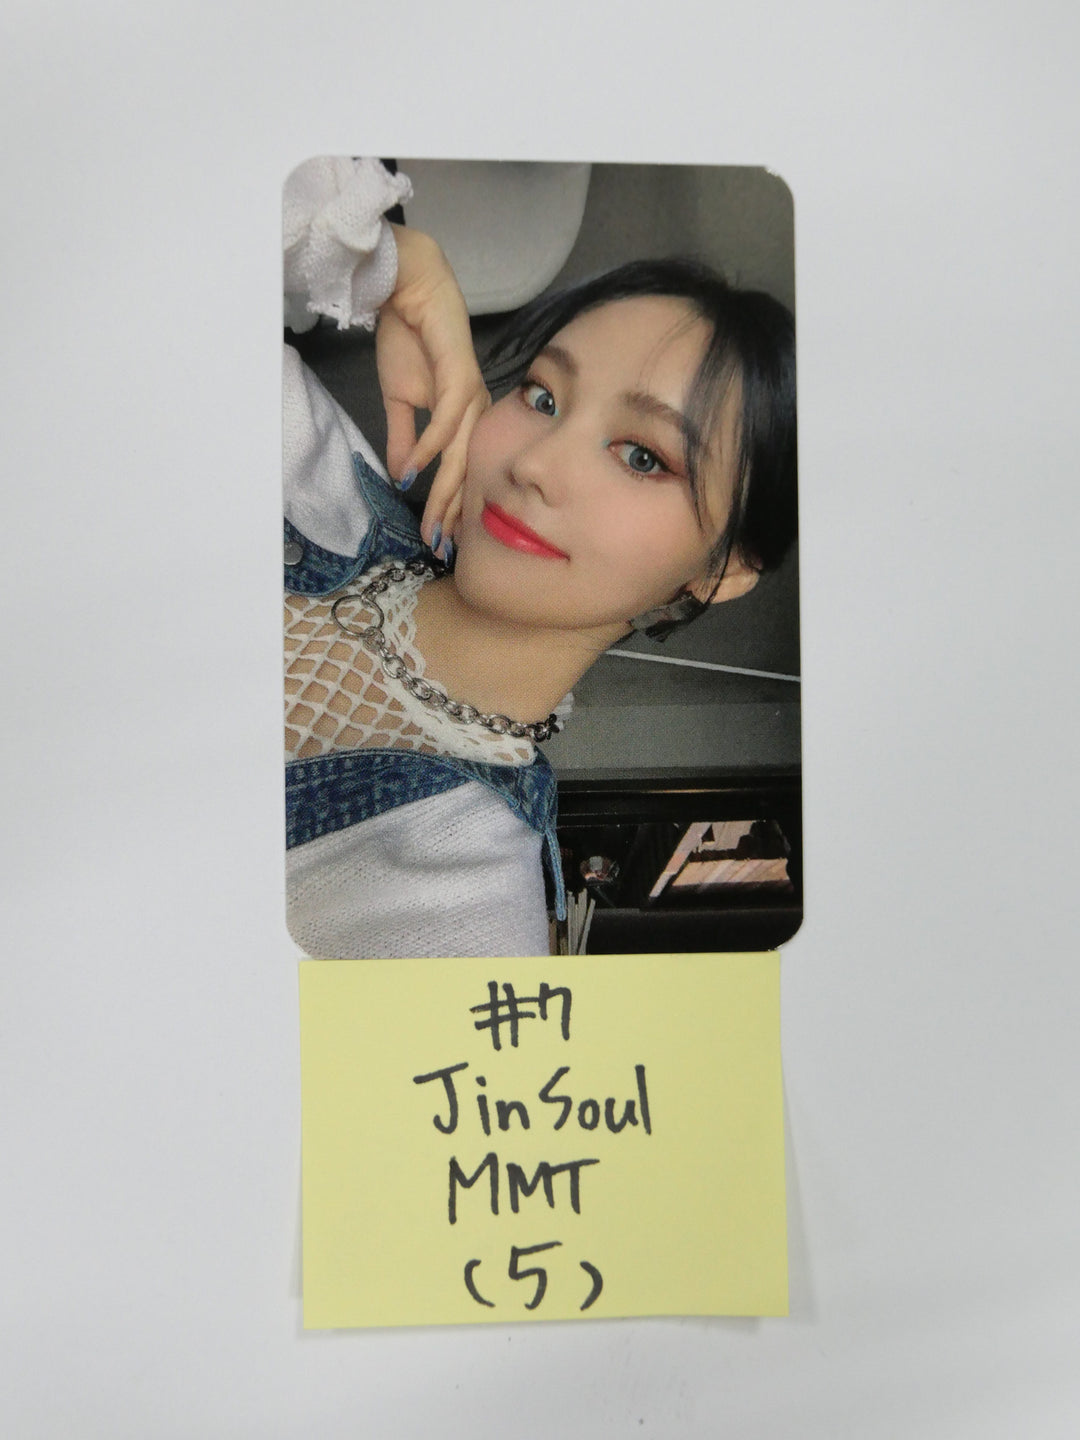 Loona '&' - MMT Fan Sign Event Photocard